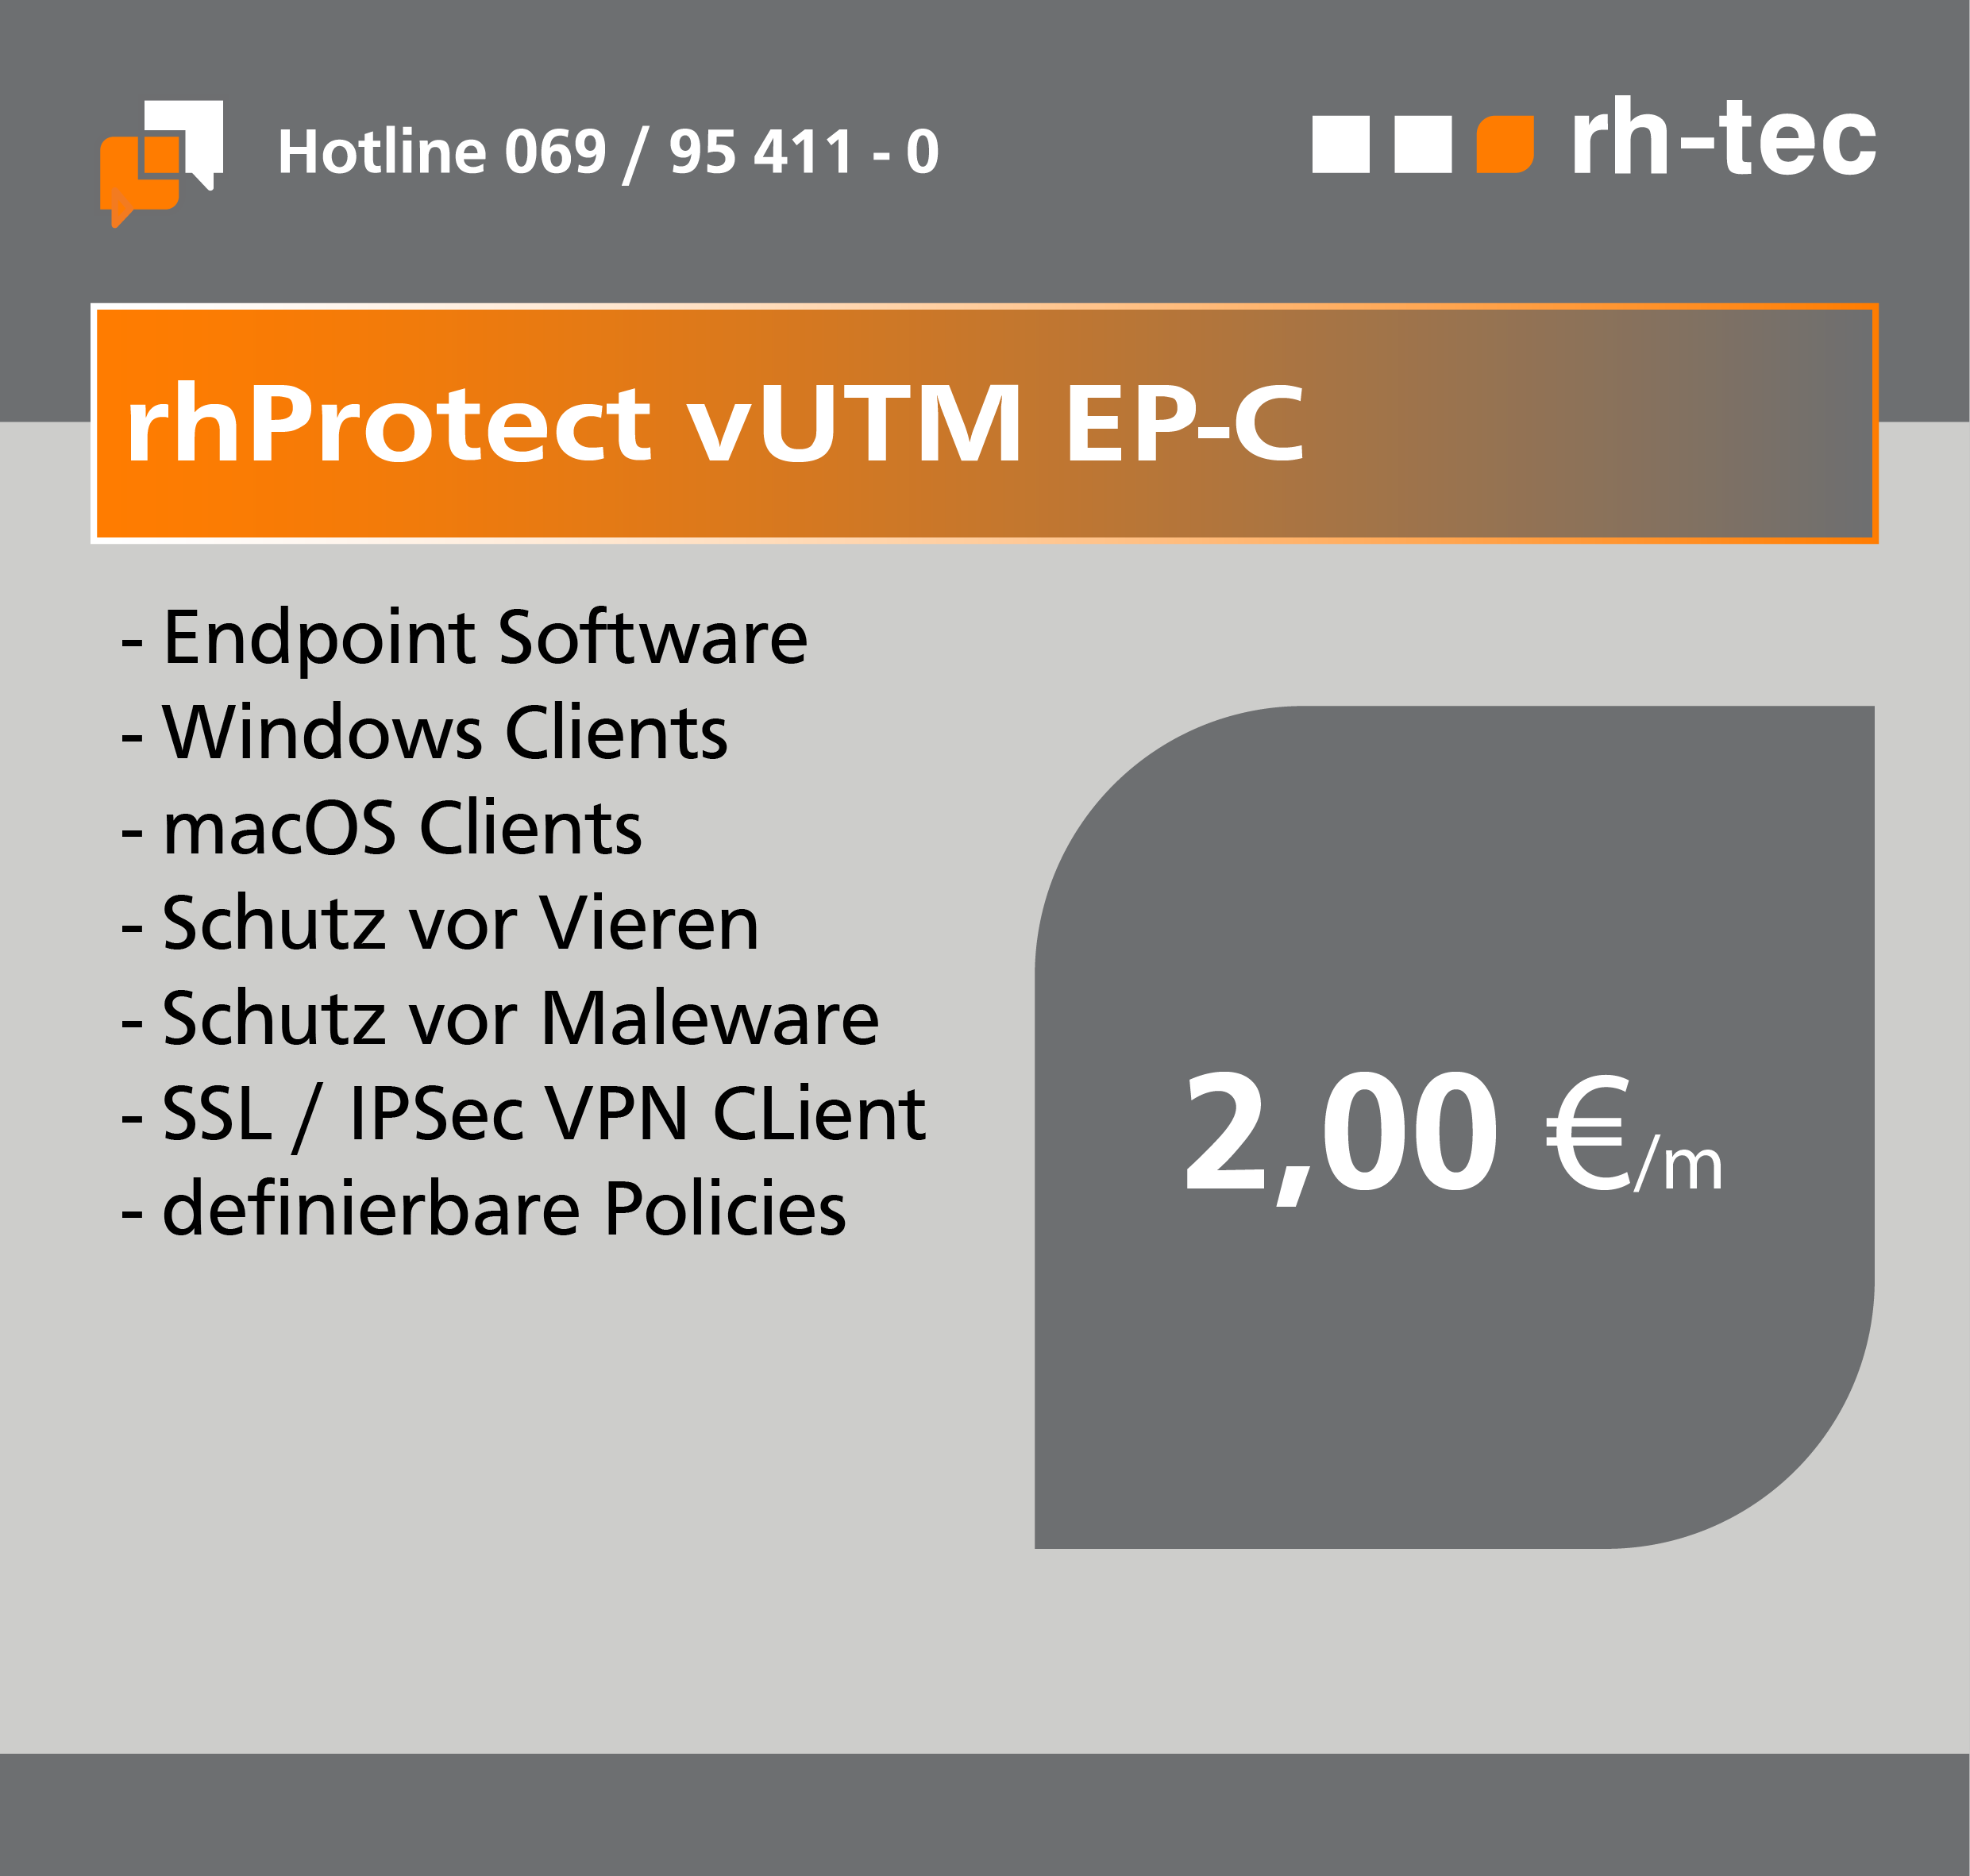 rhProtect vUTM EP-C